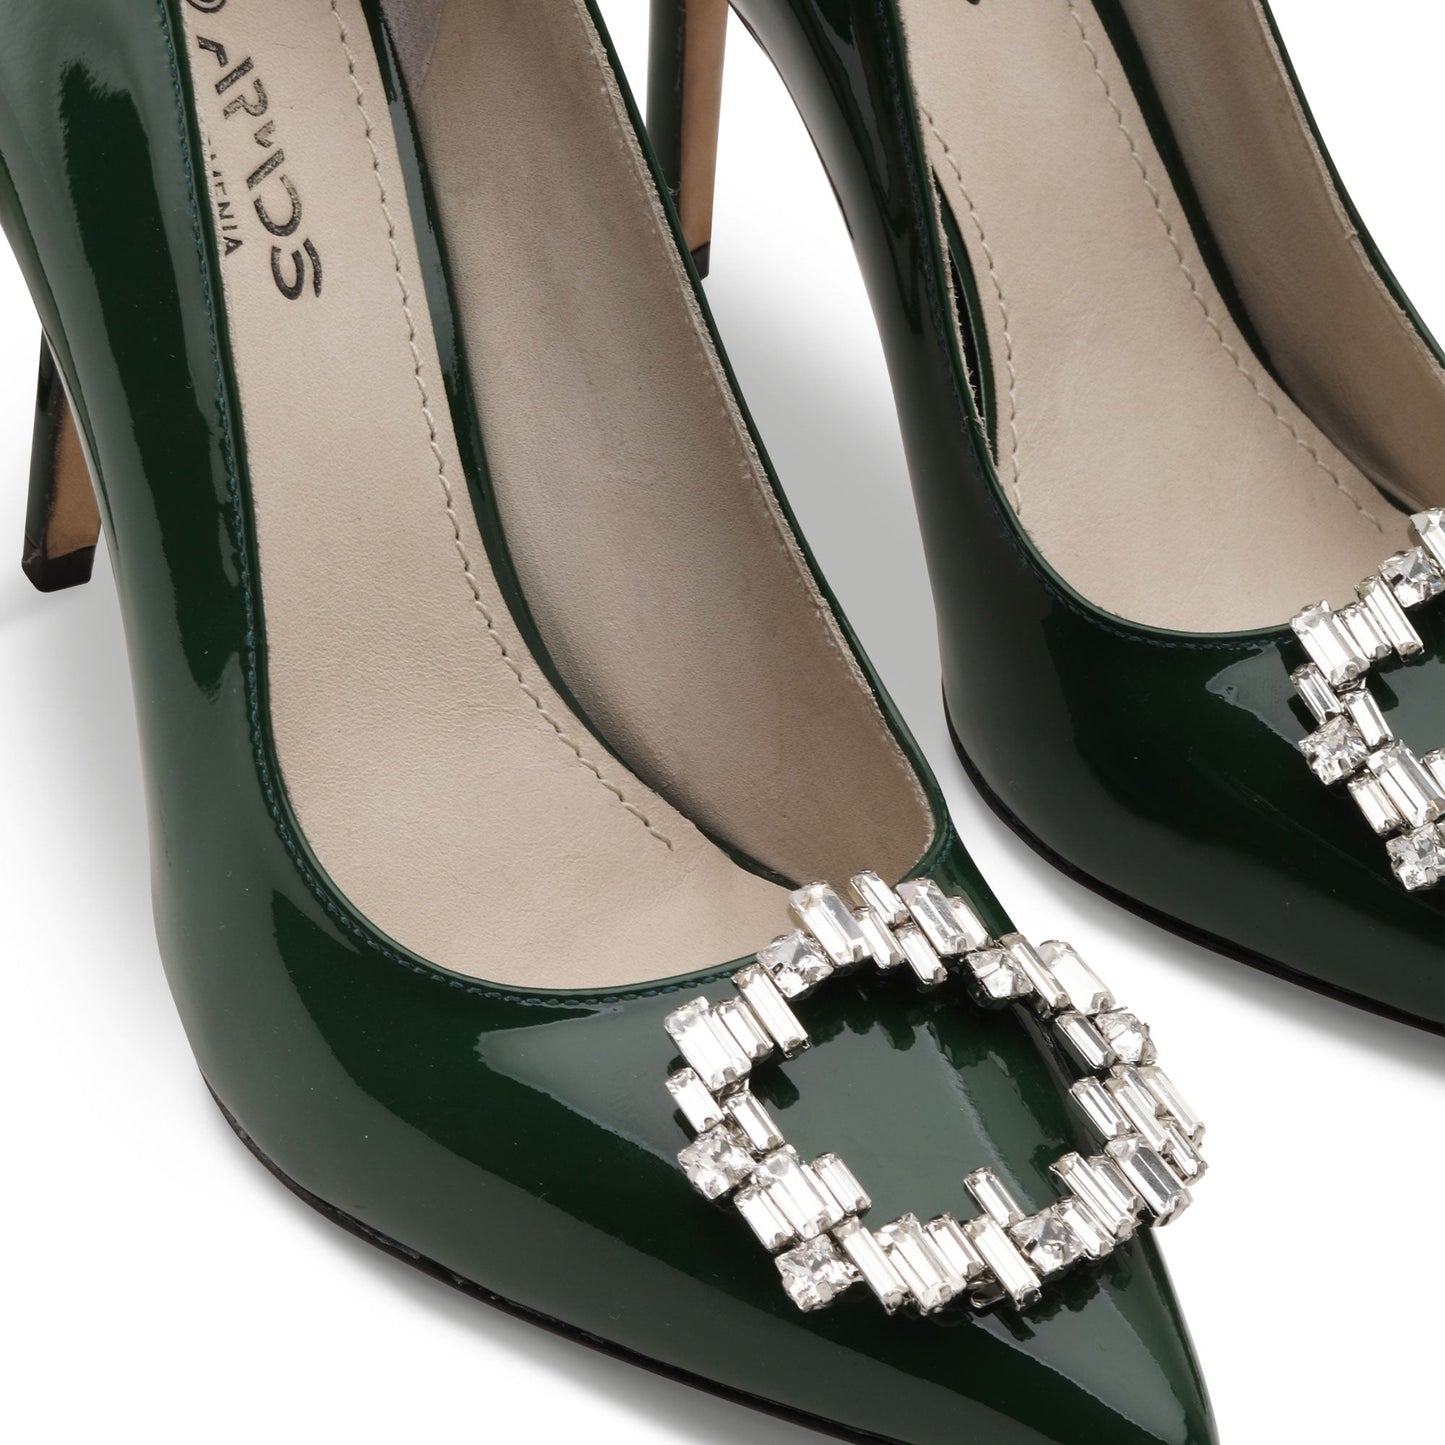 Green lacquered shoes